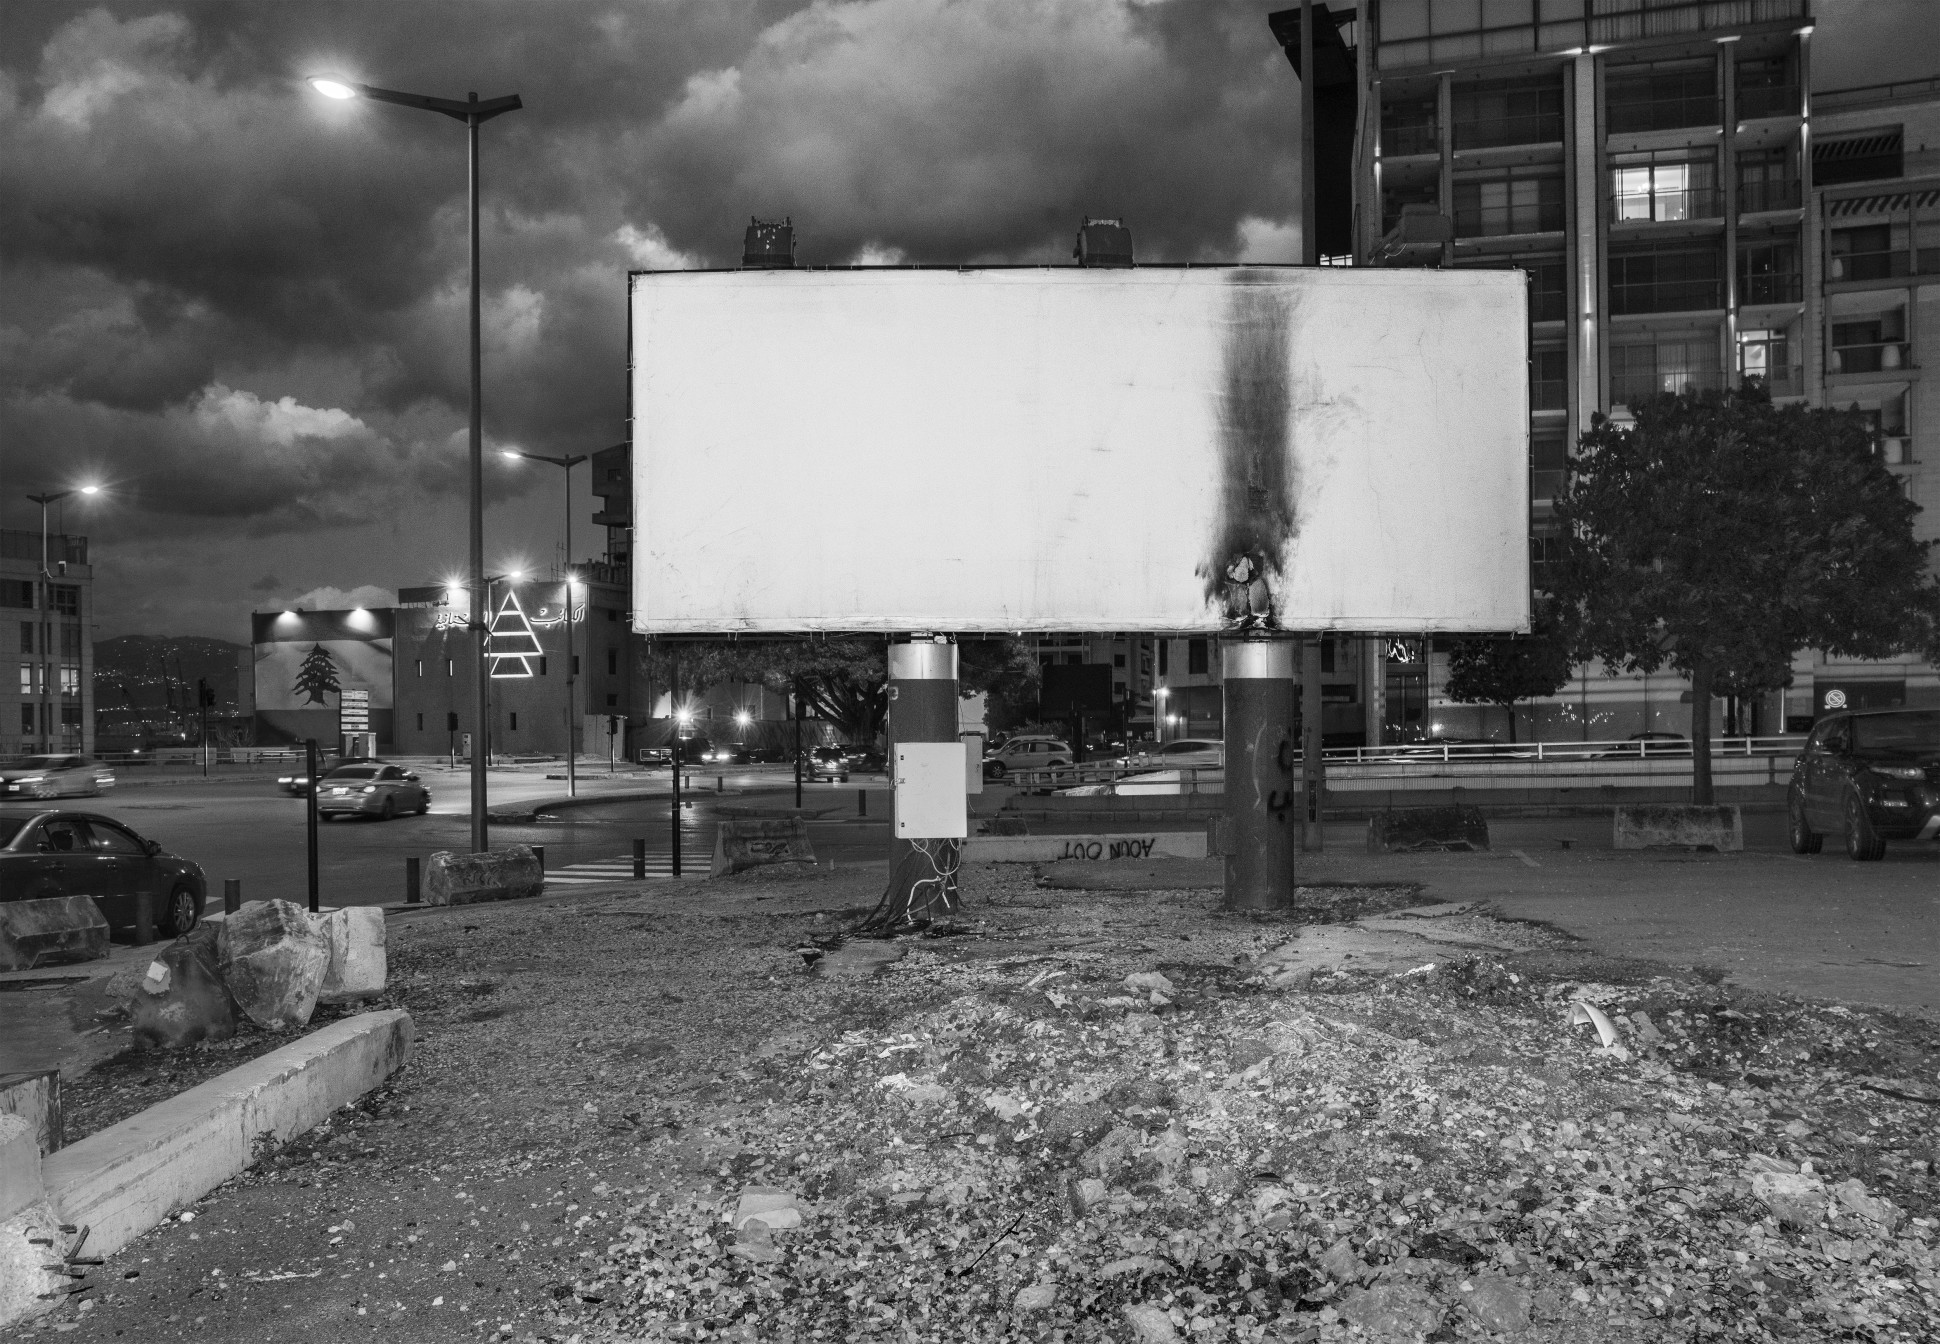 Signs after protests. Beirut, Lebanon, 2020 Archival fiber inkjet print mounted on aluminum 41 x 59 cm. / 16 x 23 in. Edition 1 of 3 + AP